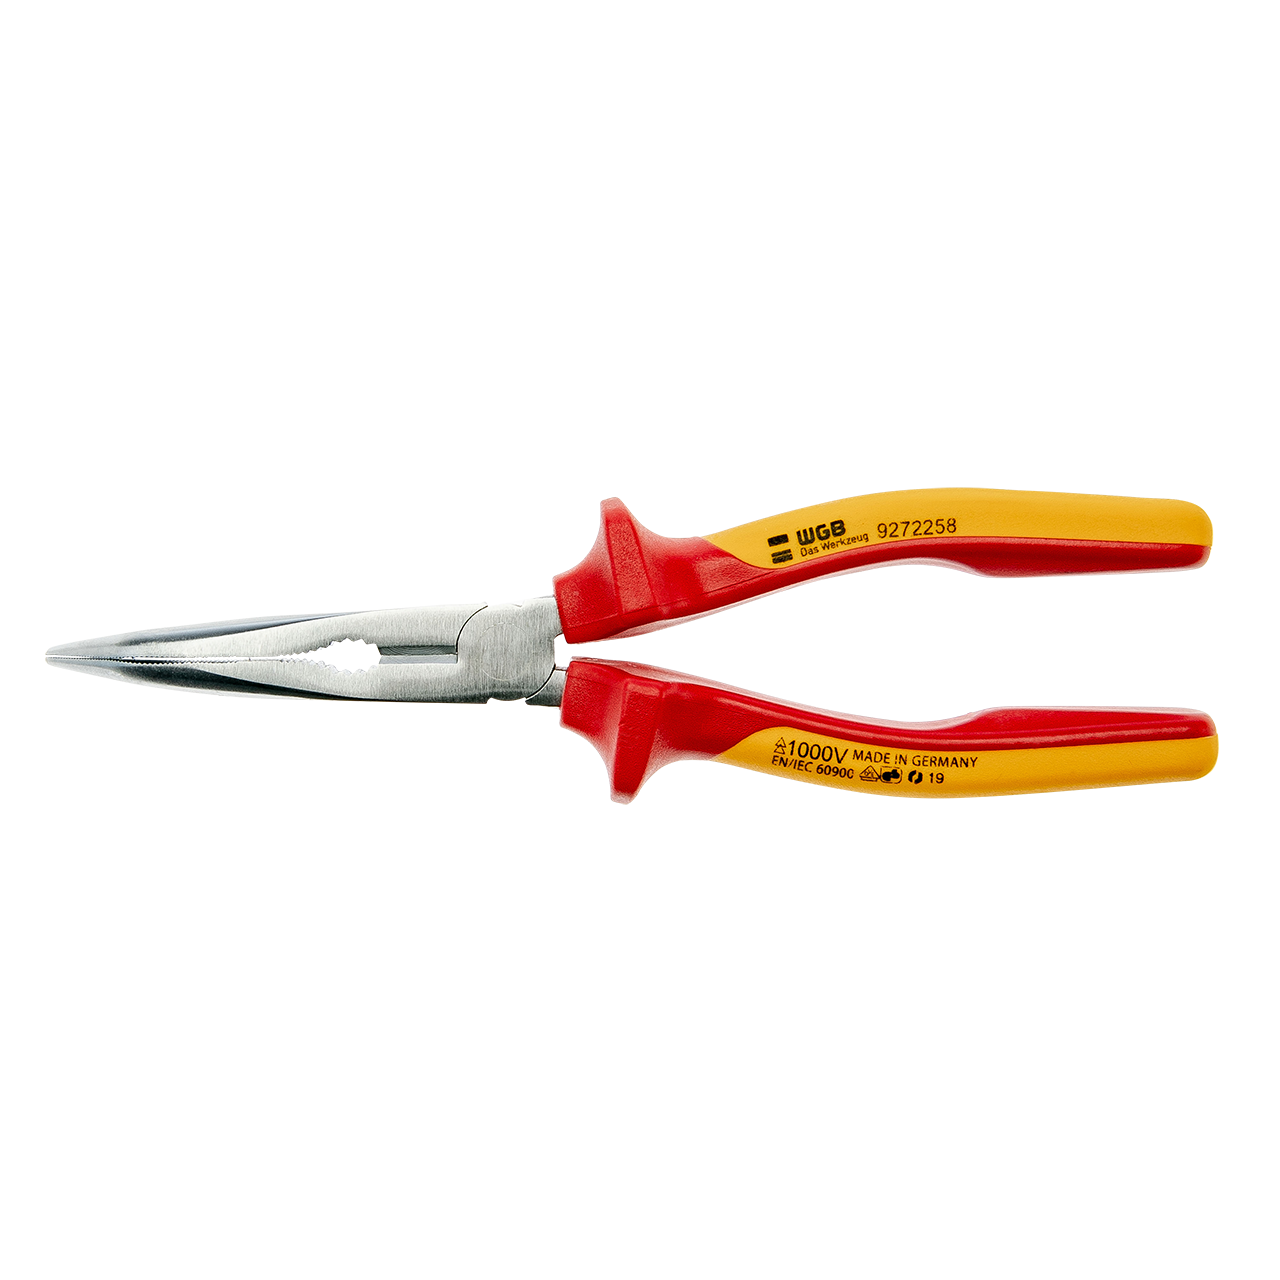 VDE Snipe Nose Pliers, DIN ISO 5745